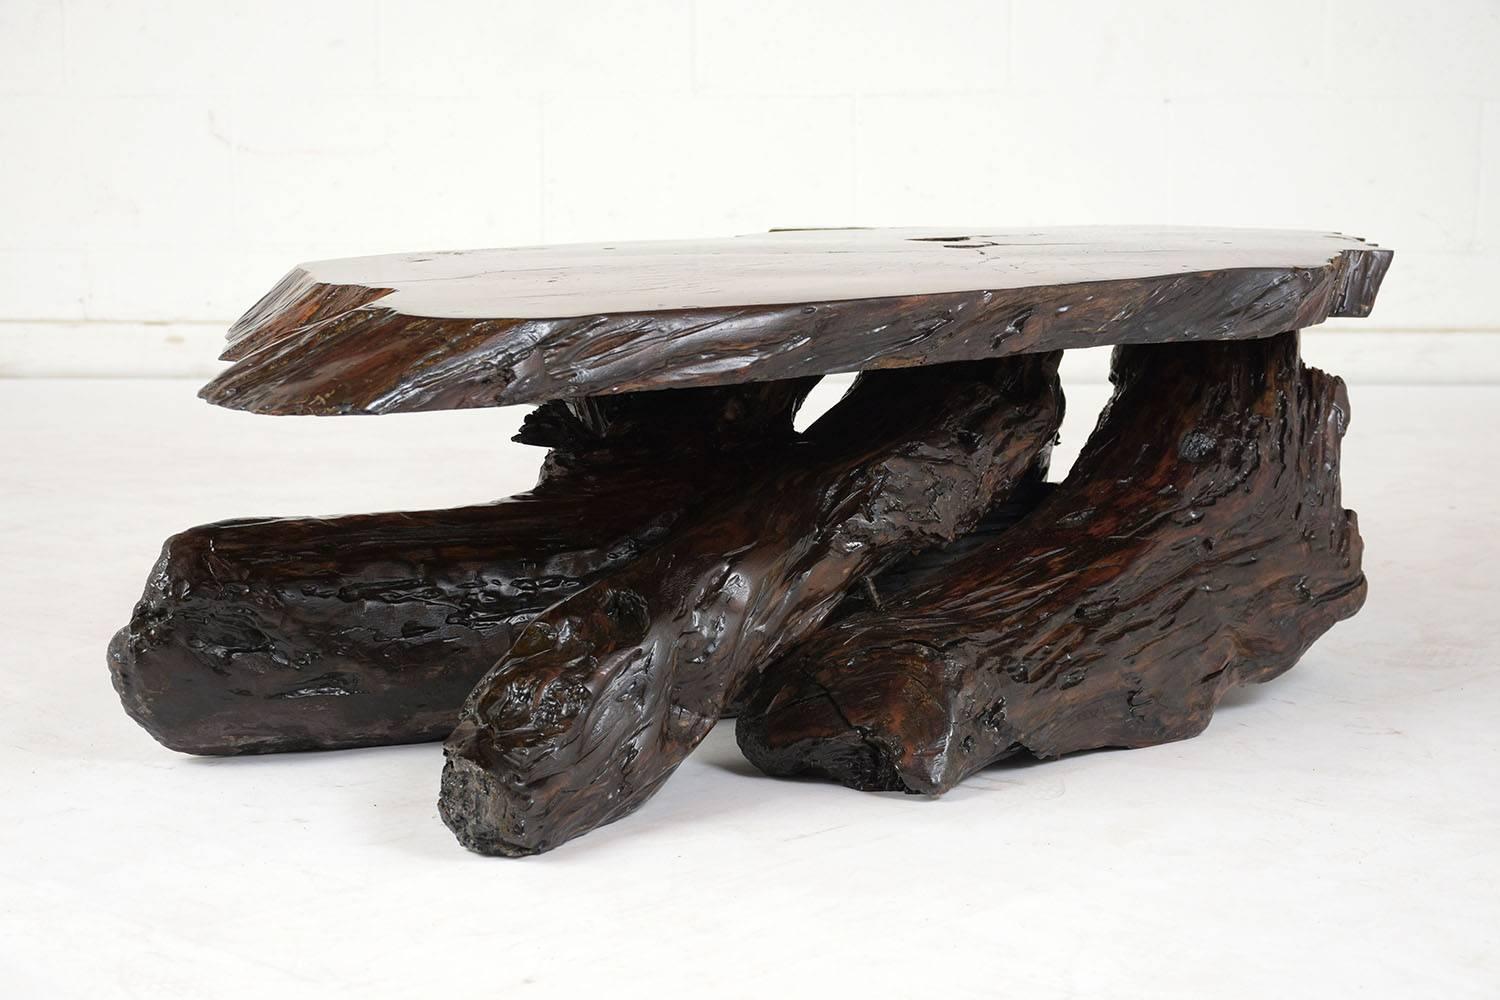 This organic style coffee table is made of walnut wood that dates to the 1900s. The tree root legs are very sturdy and hold up a slab with a live edge finish. The table is stained a deep walnut color with a lacquered finish. This coffee table is